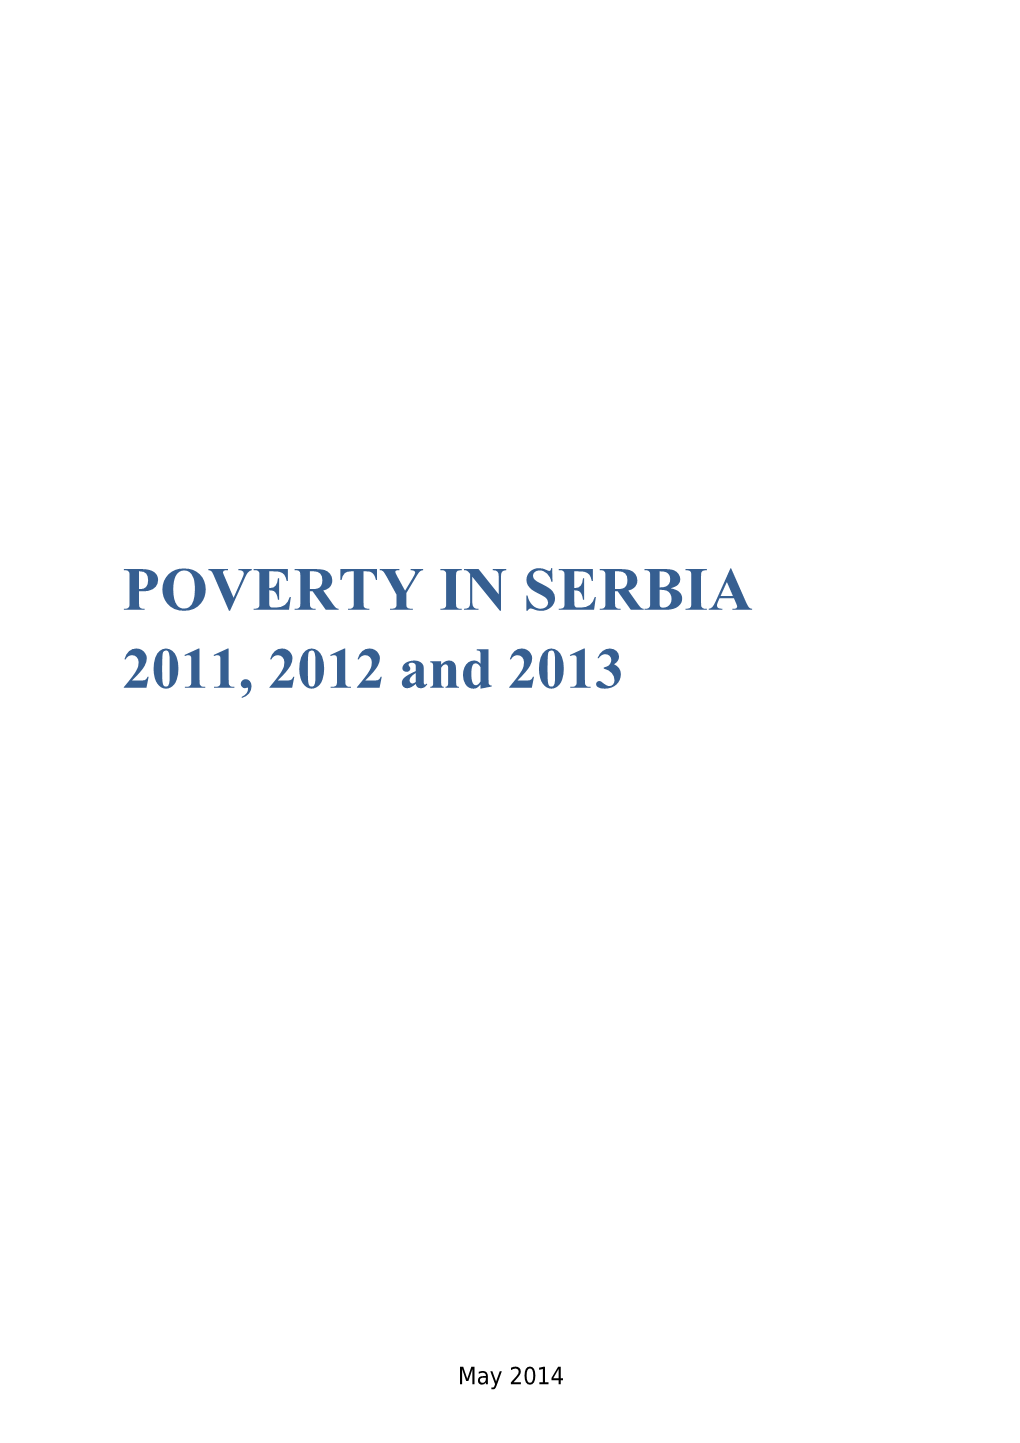 Social Inclusion and Poverty Reduction Unit